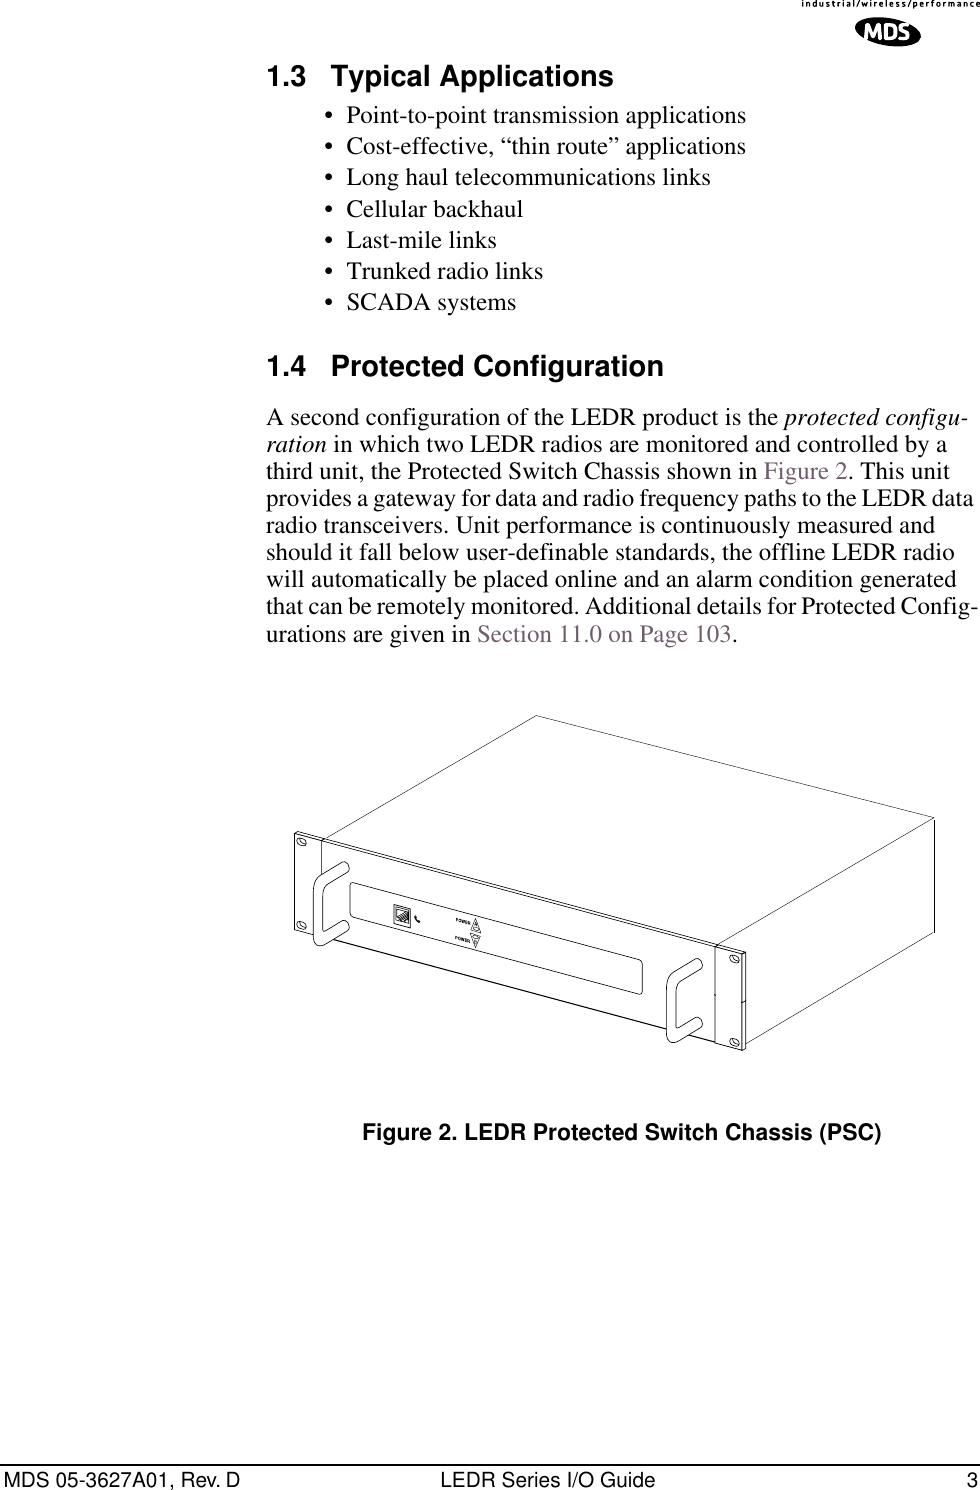  MDS 05-3627A01, Rev. D LEDR Series I/O Guide 3 1.3 Typical Applications • Point-to-point transmission applications• Cost-effective, “thin route” applications• Long haul telecommunications links• Cellular backhaul• Last-mile links• Trunked radio links• SCADA systems 1.4 Protected Configuration A second configuration of the LEDR product is the  protected configu-ration  in which two LEDR radios are monitored and controlled by a third unit, the Protected Switch Chassis shown in Figure 2. This unit provides a gateway for data and radio frequency paths to the LEDR data radio transceivers. Unit performance is continuously measured and should it fall below user-definable standards, the offline LEDR radio will automatically be placed online and an alarm condition generated that can be remotely monitored. Additional details for Protected Config-urations are given in Section 11.0 on Page 103. Invisible place holder Figure 2. LEDR Protected Switch Chassis (PSC)